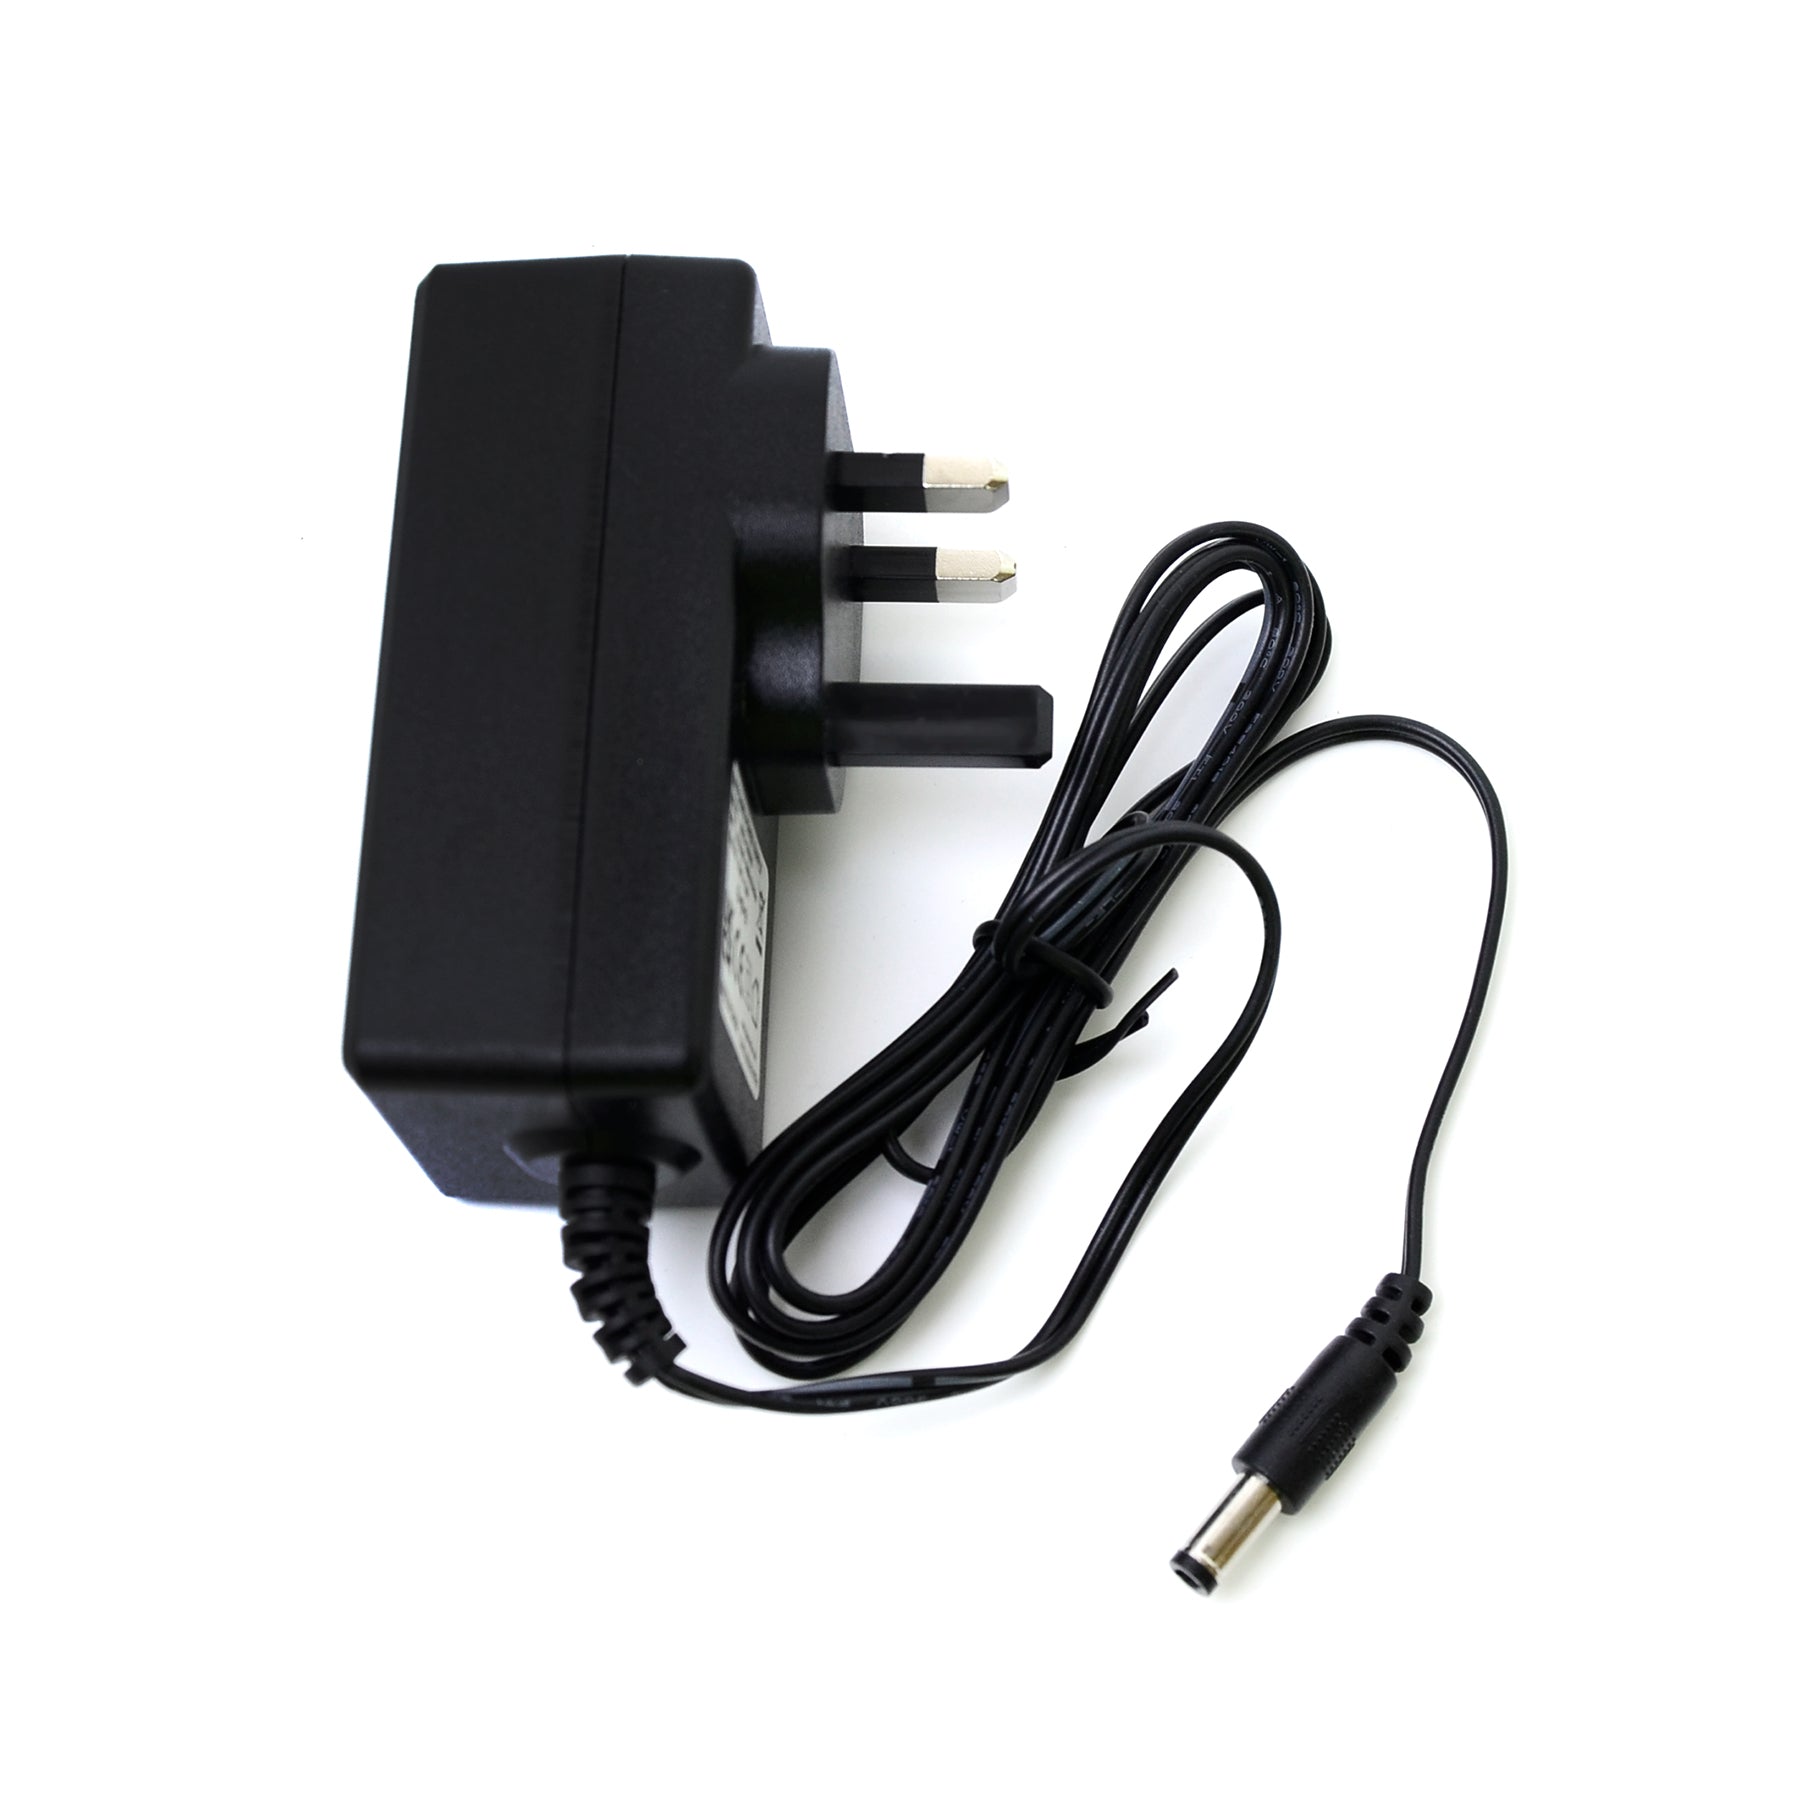 G.W.S. LED LED Drivers/LED Power Supplies IP20 (Non-Waterproof) / 12V / 24W 12V 2A 24W LED Power Adapter